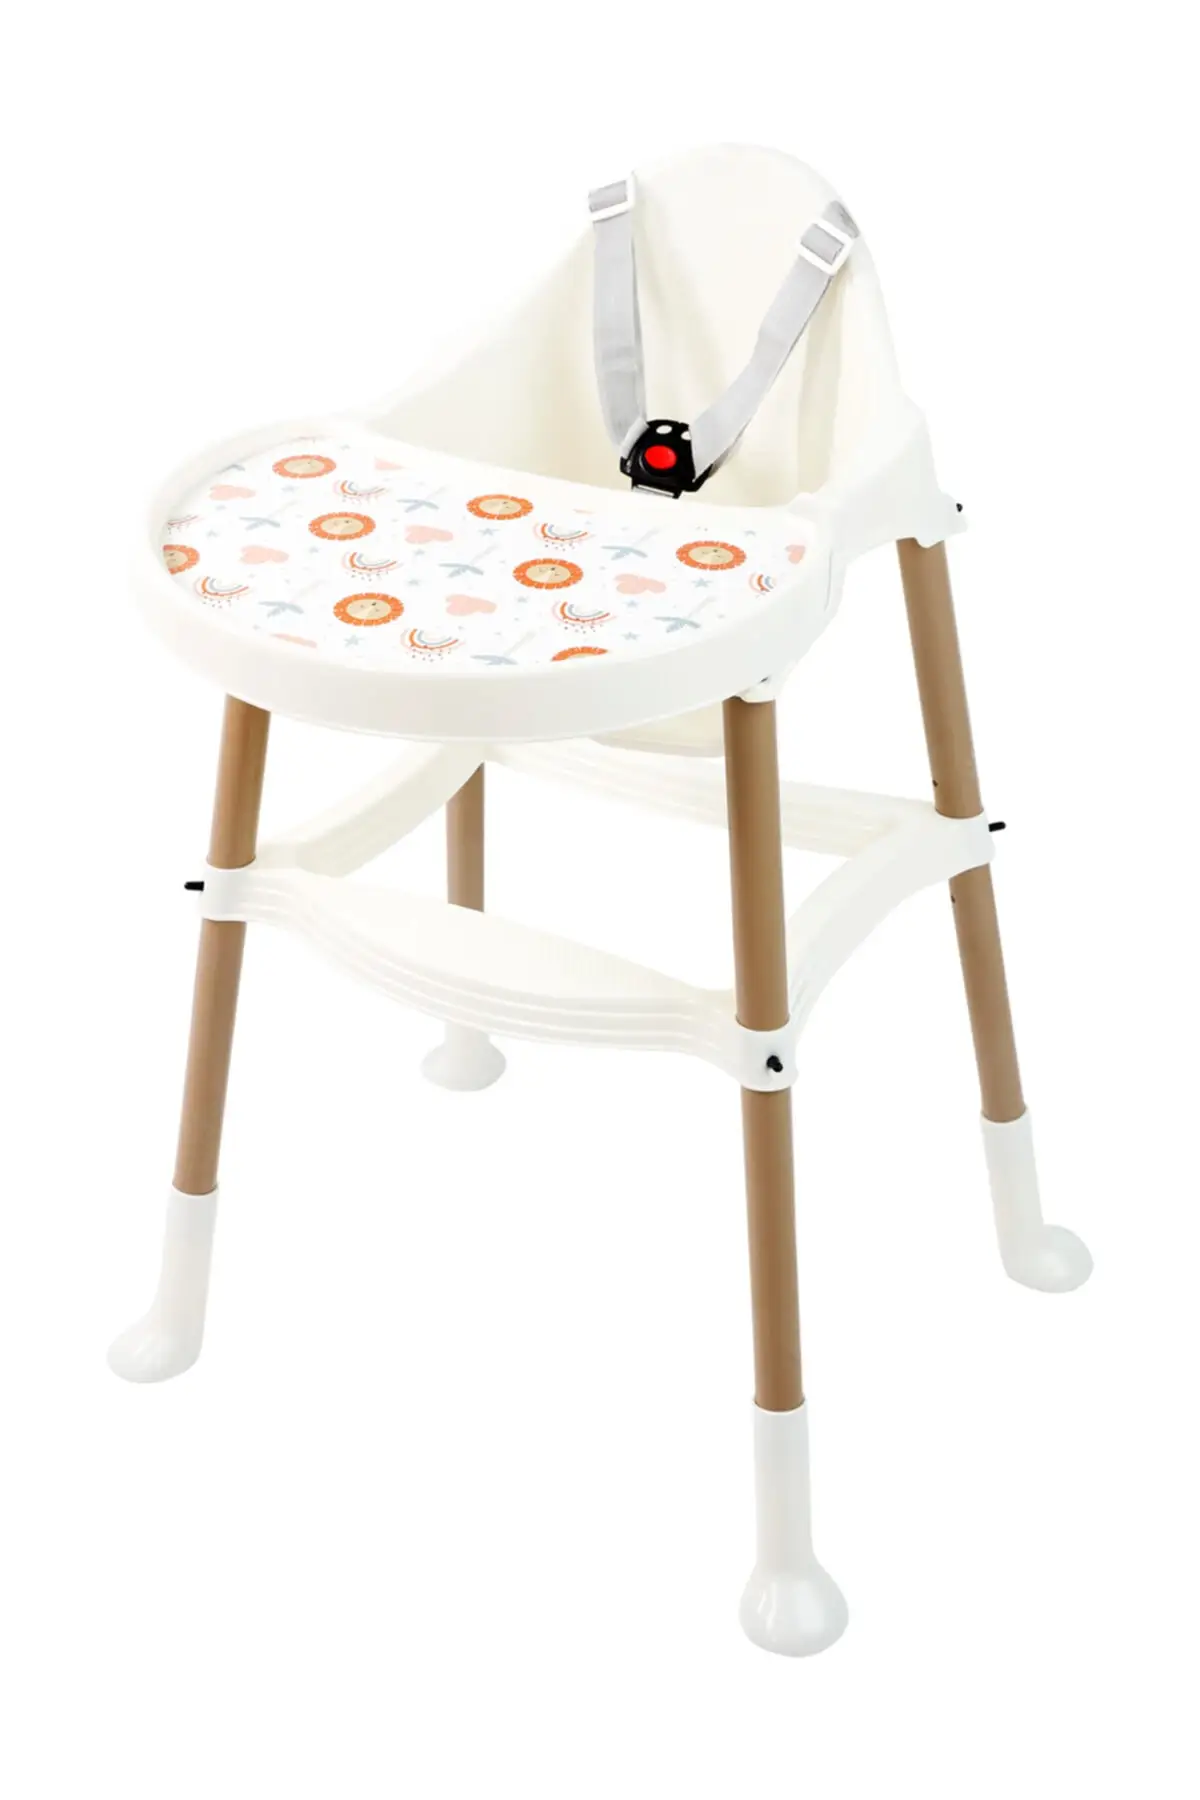 Baby High Chair for Feeding Children's Table and Chair Baby Seat Folding Adjustable Babies Dining Chair with QualityTray